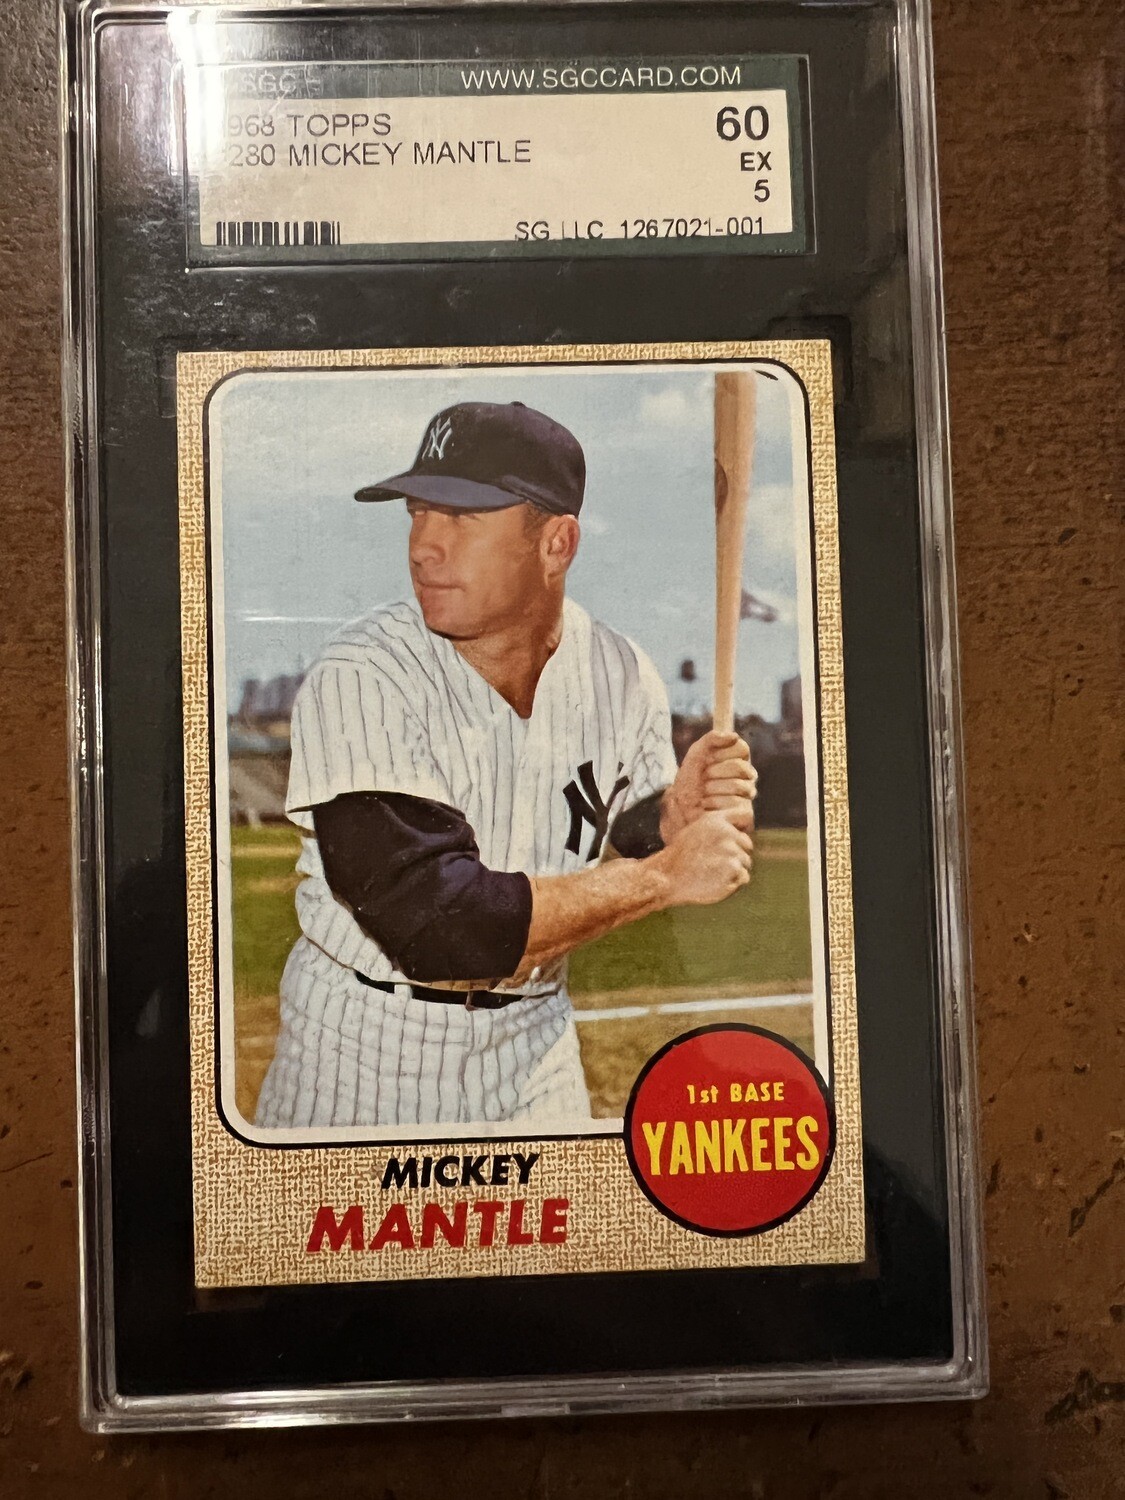 1968 Topps #280 Mickey Mantle SGC 5